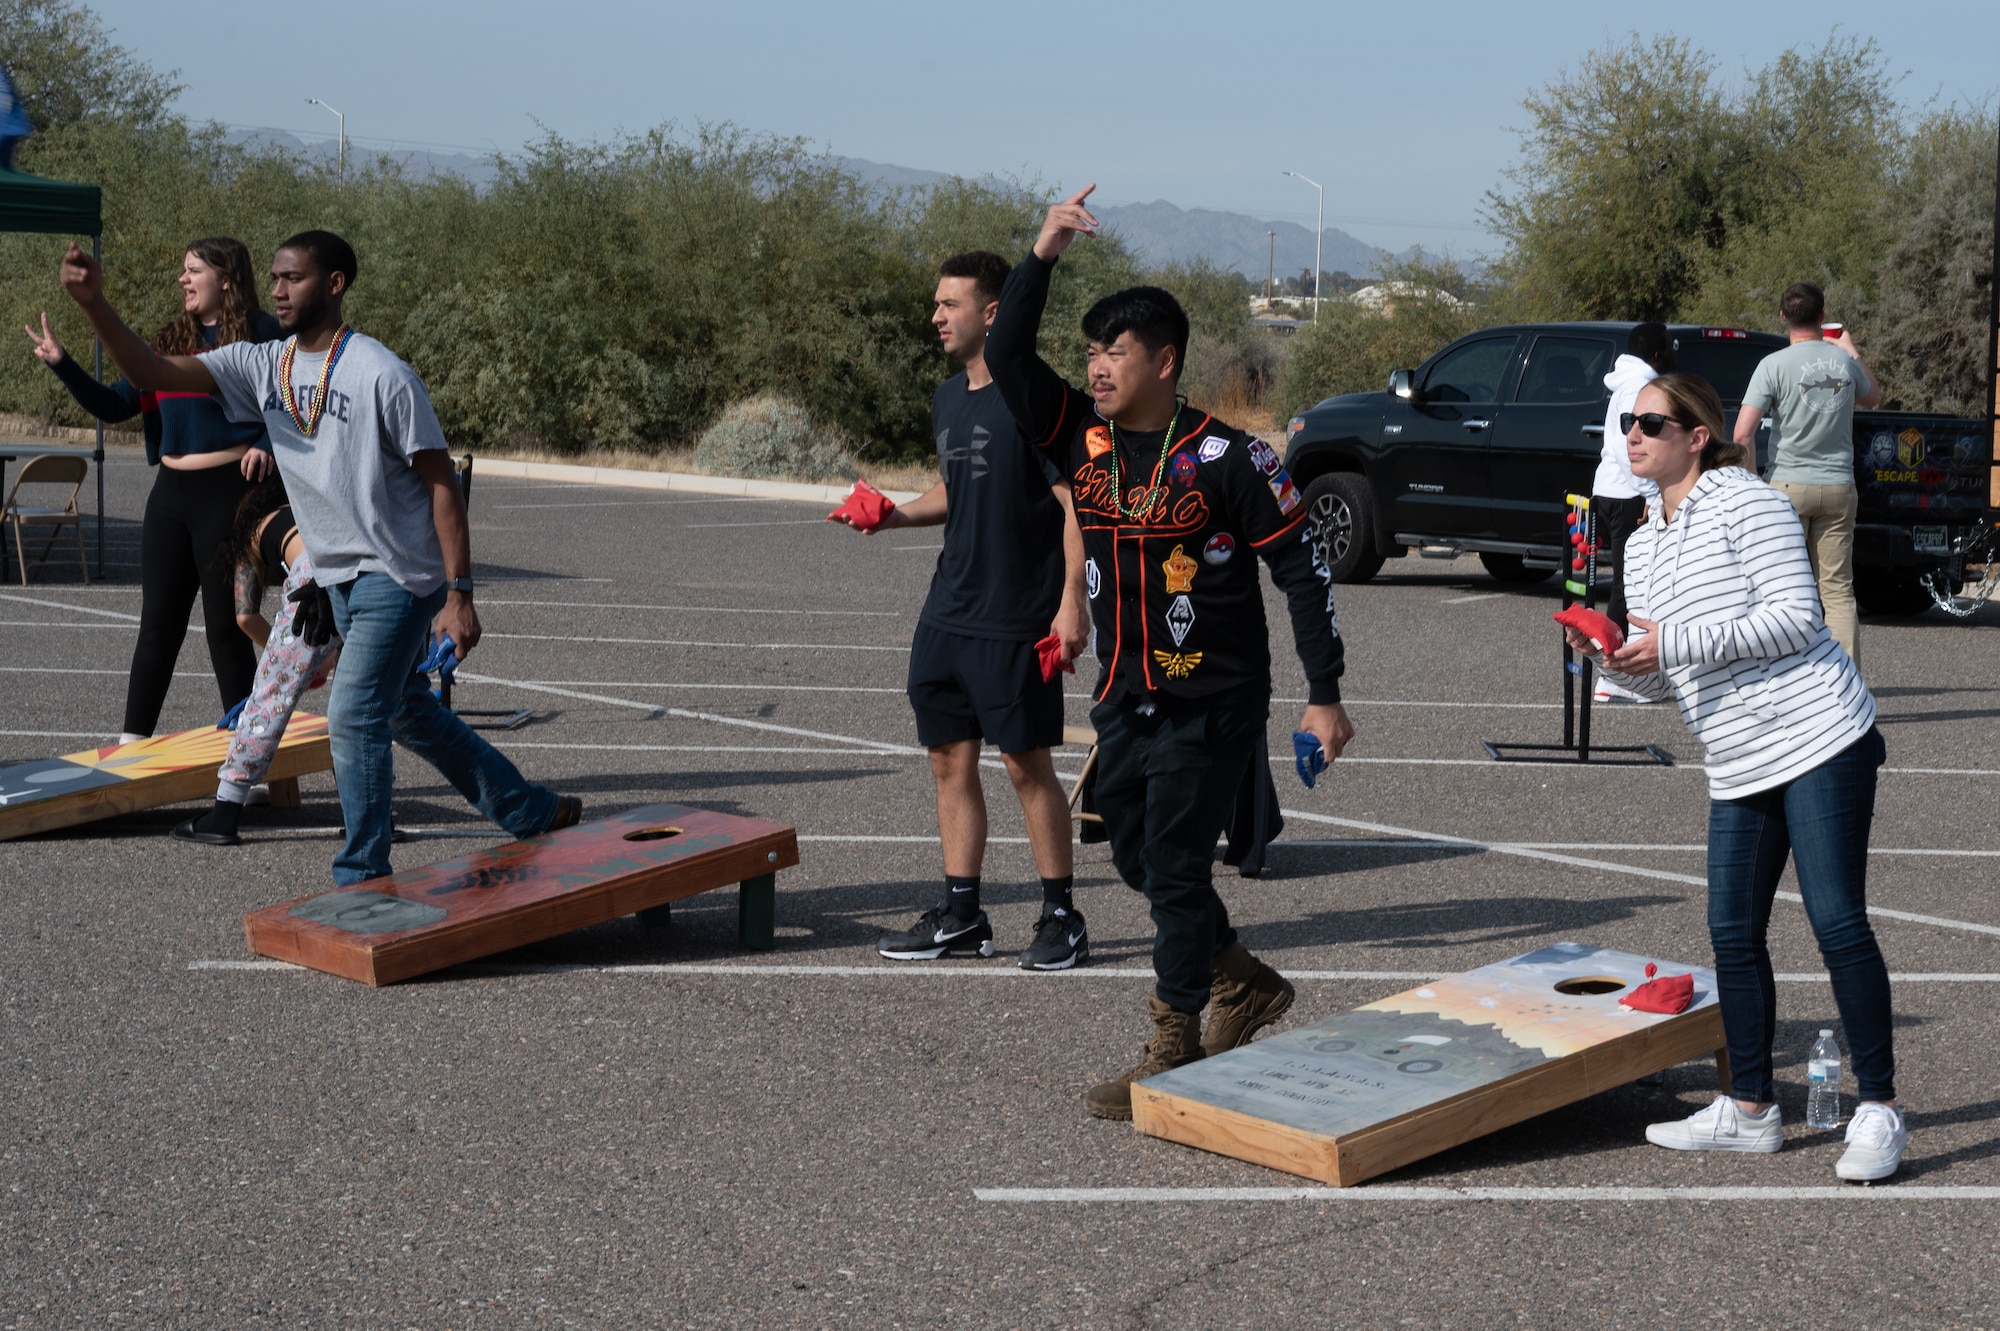 Airmen assigned to the 56th Equipment Maintenance Squadron and family members participate in a cornhole tournament during the Saint Barbara’s Day Cactus Bash celebration Dec. 4, 2022, at Luke Air Force Base, Arizona.